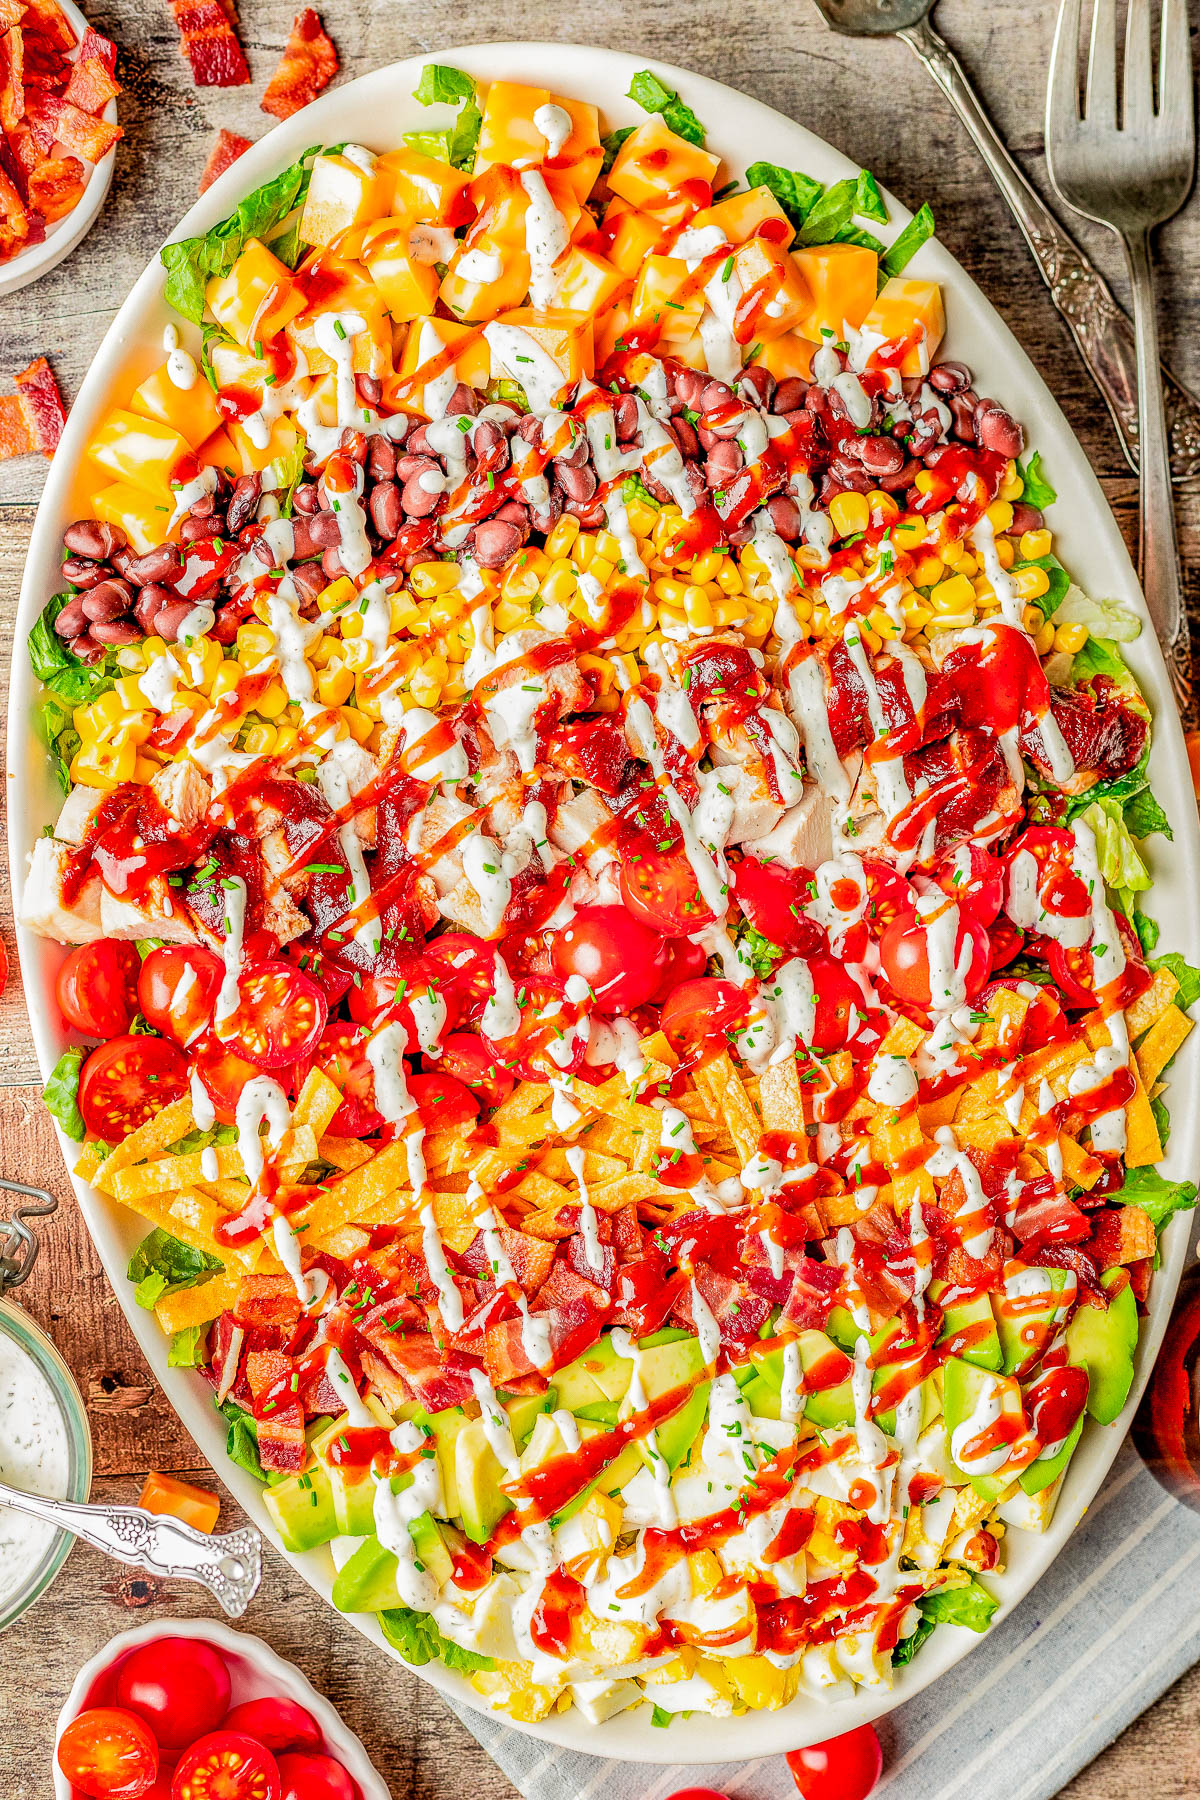 Southwest Chicken Cobb Salad - A Southwestern spin on traditional Cobb salad complete with tender chicken, crispy bacon, cheese, hard-boiled eggs, tomatoes, black beans, corn, and avocado over a bed of Romaine lettuce! Topped with barbecue sauce and Ranch, there's so much FLAVOR and TEXTURE galore in every bite of this crispy, crunchy, EASY salad!